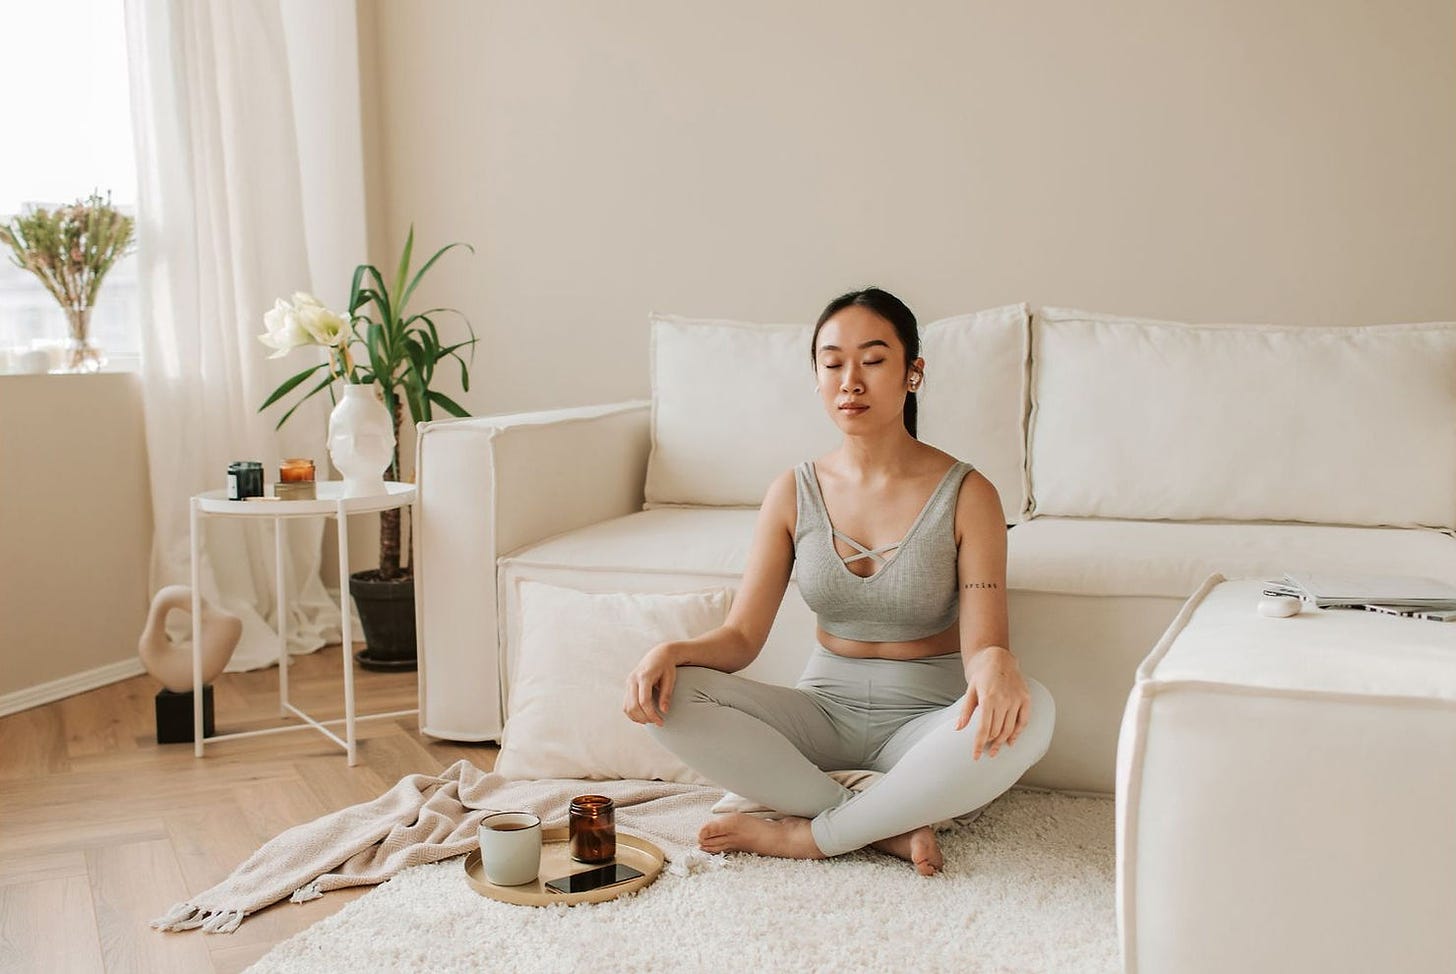 To stay more alert during meditation, stay away from practicing on your bed.